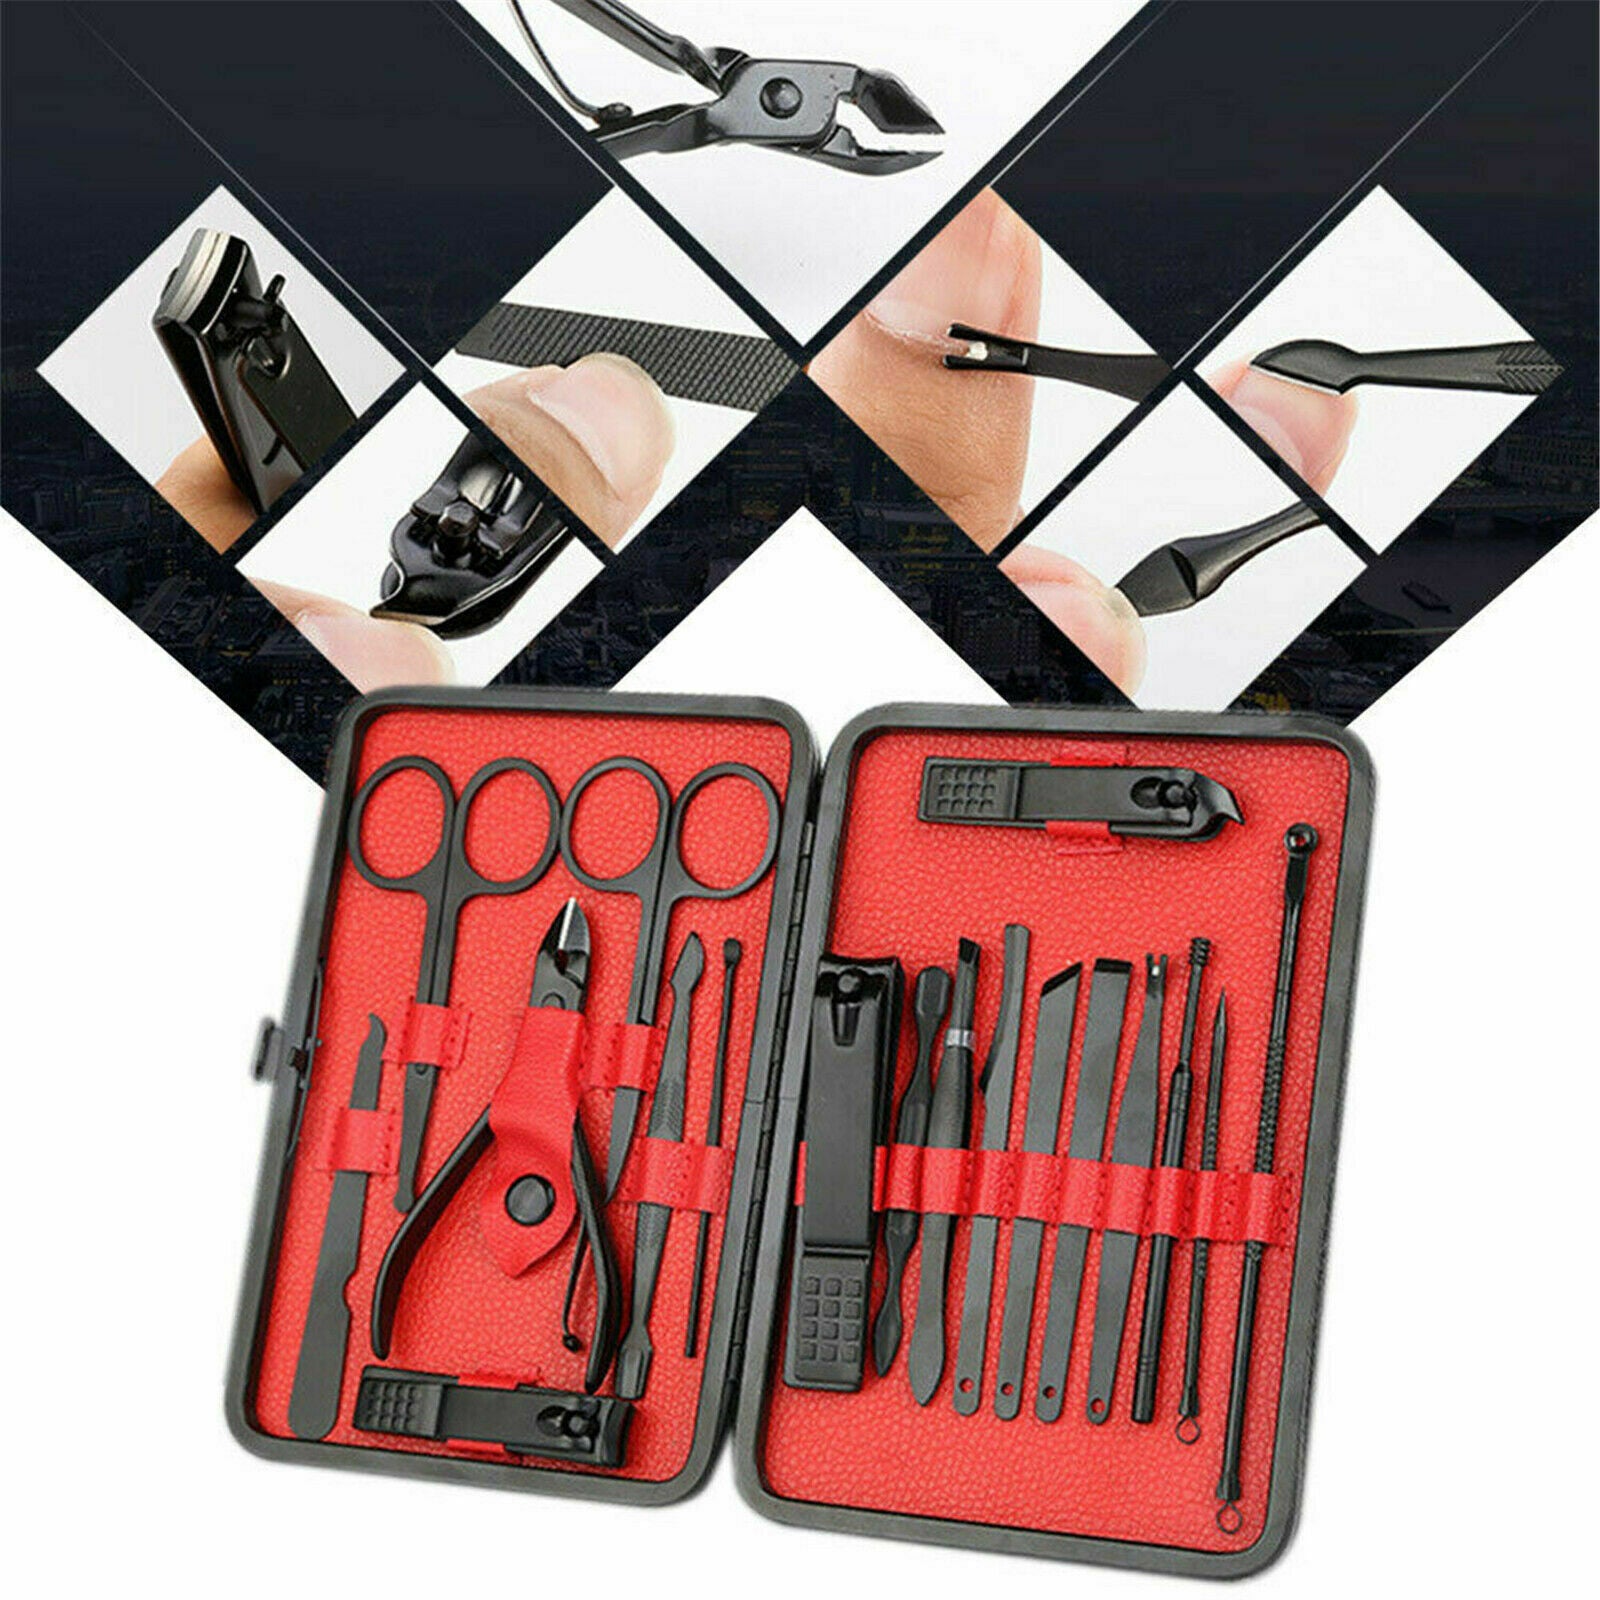 Buy 18PCS/Set Pedicure Kit Stainless Steel Nail Grooming Clippers Manicure Online Australia at BargainTown